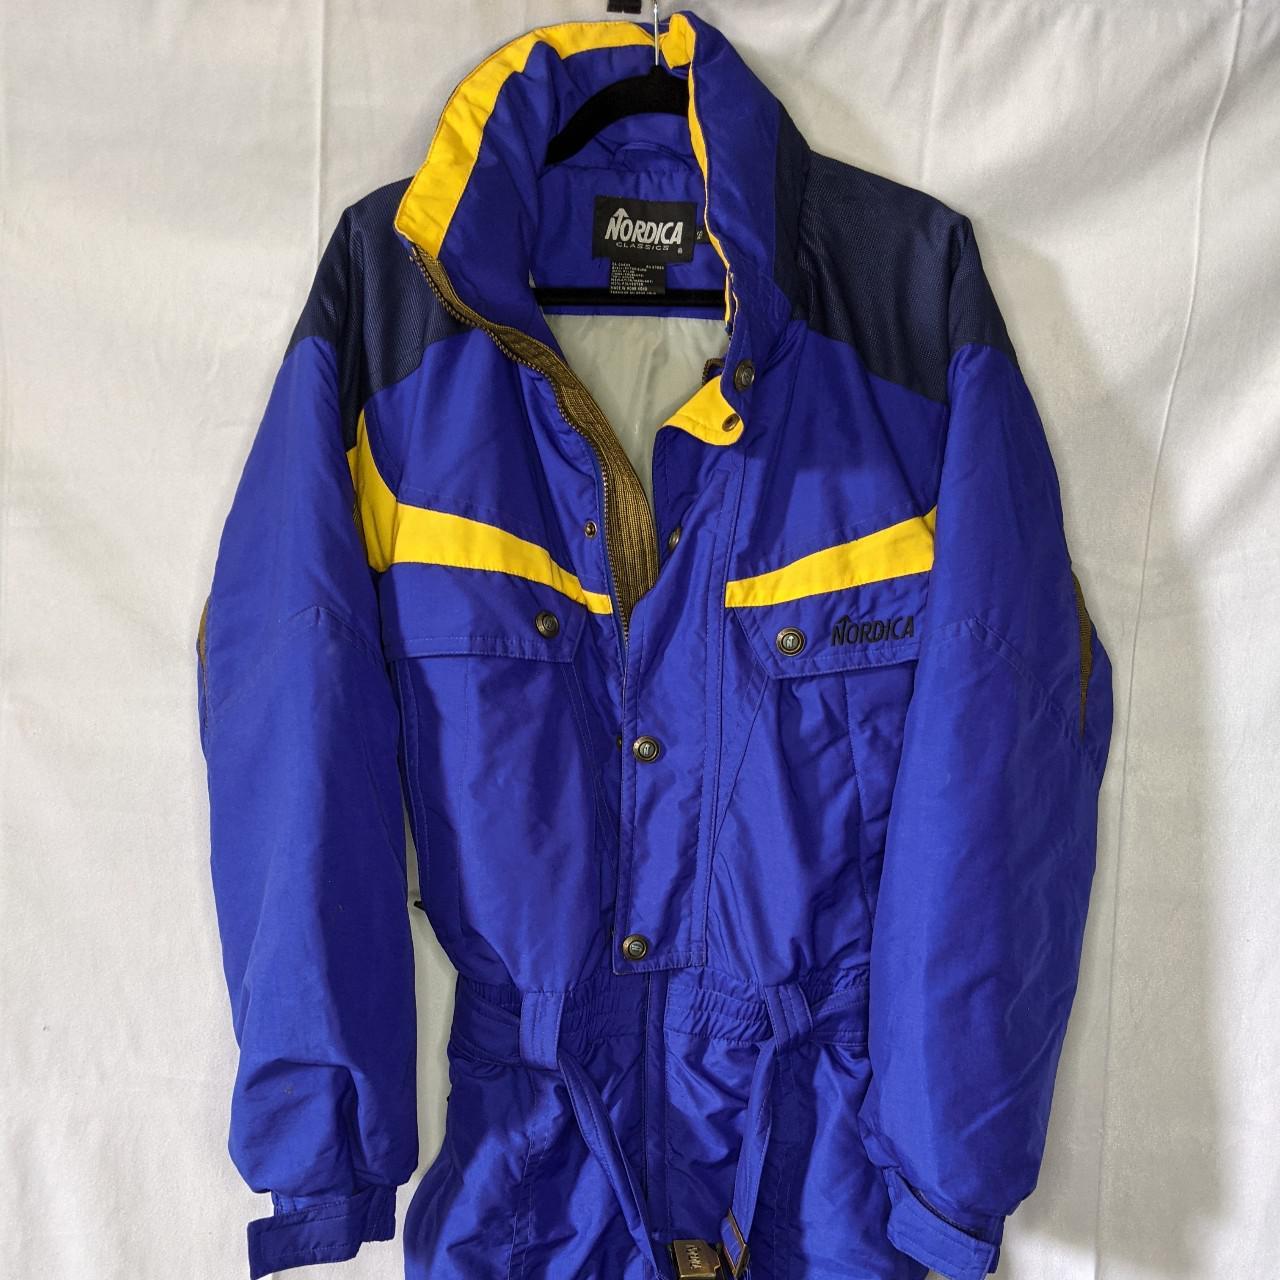 NORDICA BLUE AND YELLOW SMALL SKIING JACKET it snow... - Depop